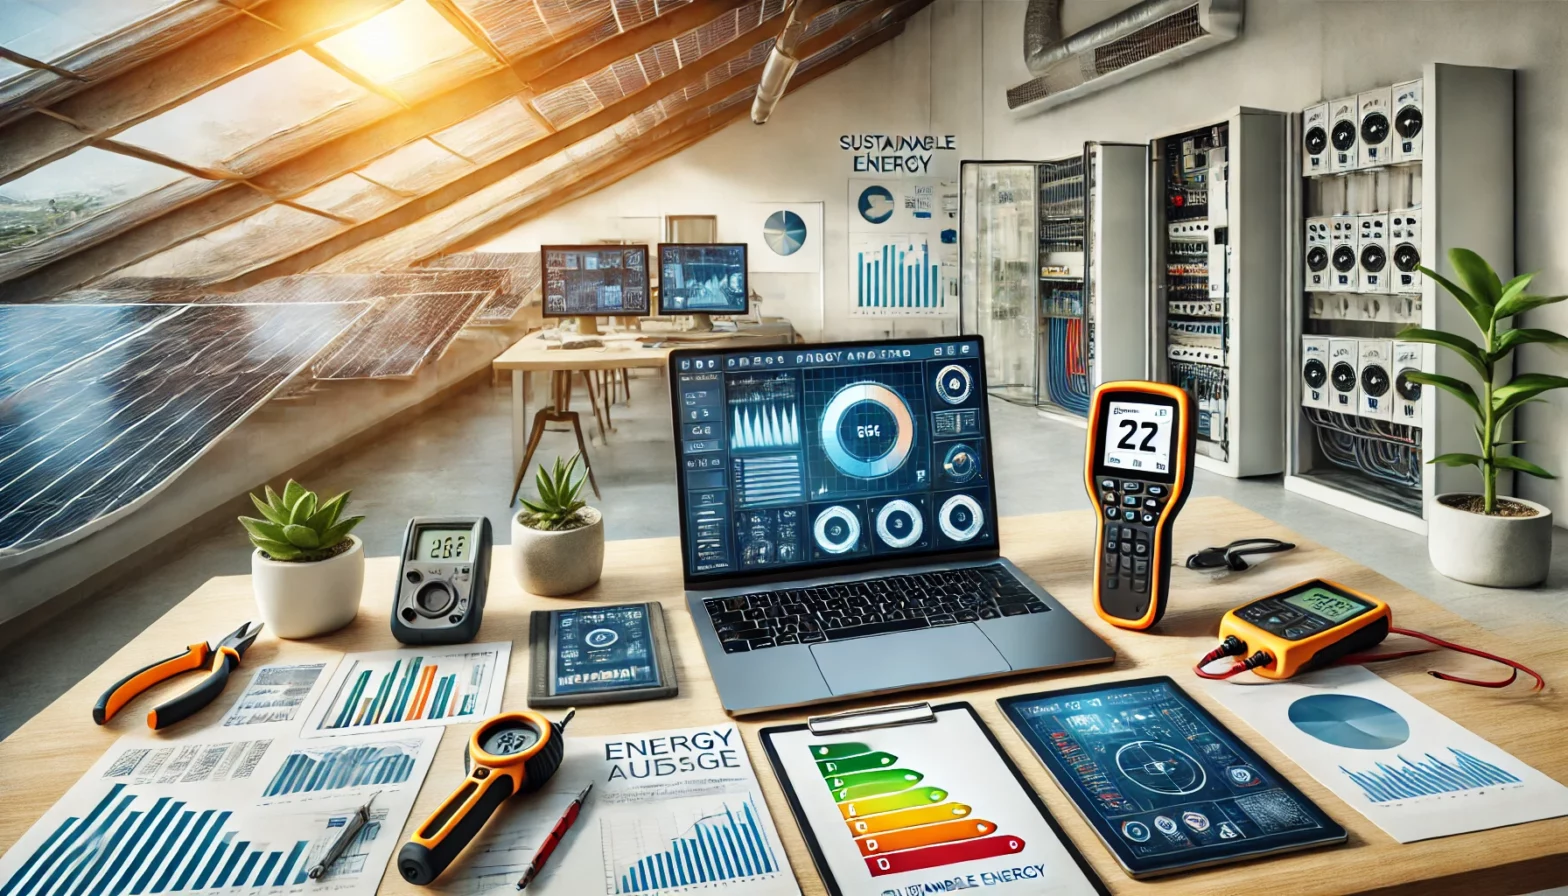 "An array of tools and software used for effective energy auditing in sustainable energy, including a laptop displaying energy auditing software, a tablet with energy usage analytics, a thermal camera, a digital multimeter, an energy meter, and various documents and charts, all set in a modern workspace with solar panels visible through a window."